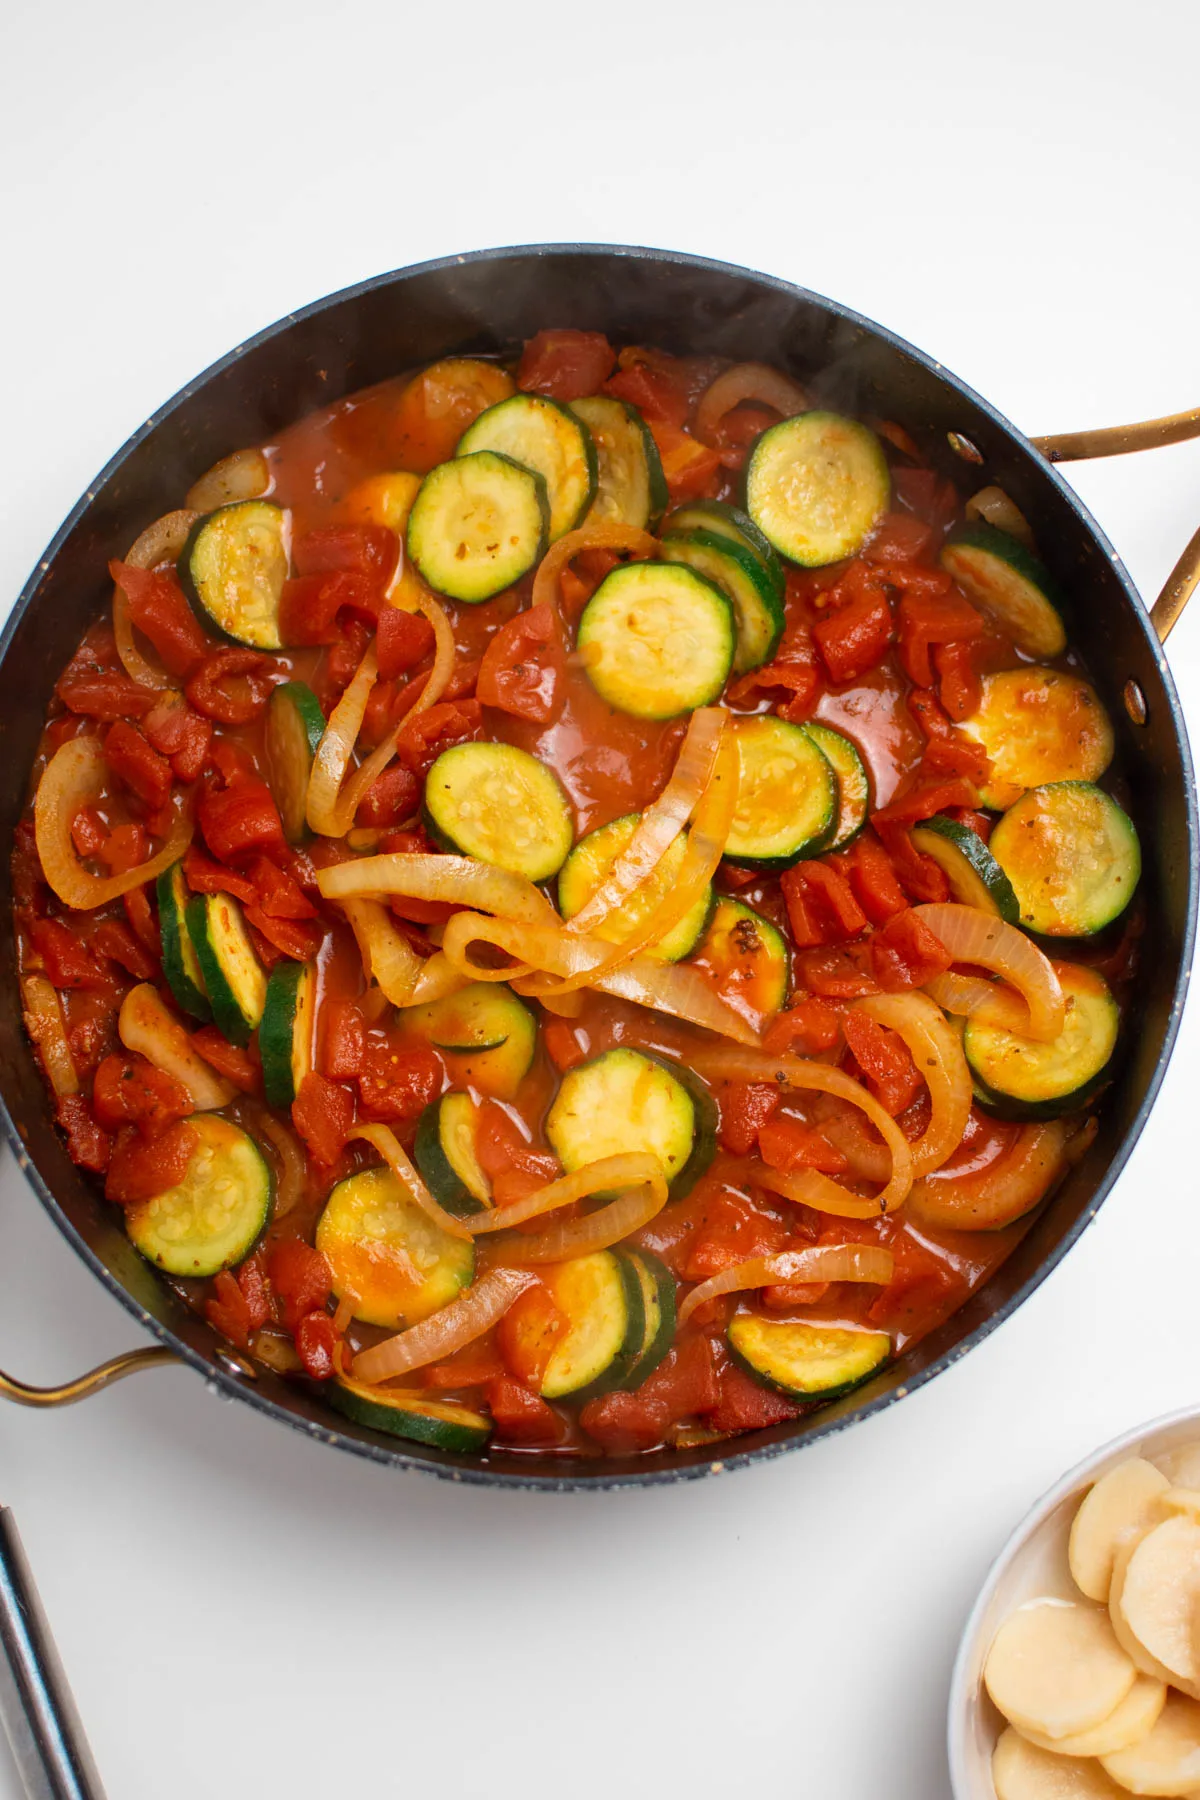 Black skillet full of sauteed vegetables including zucchini, onion, and tomatoes.